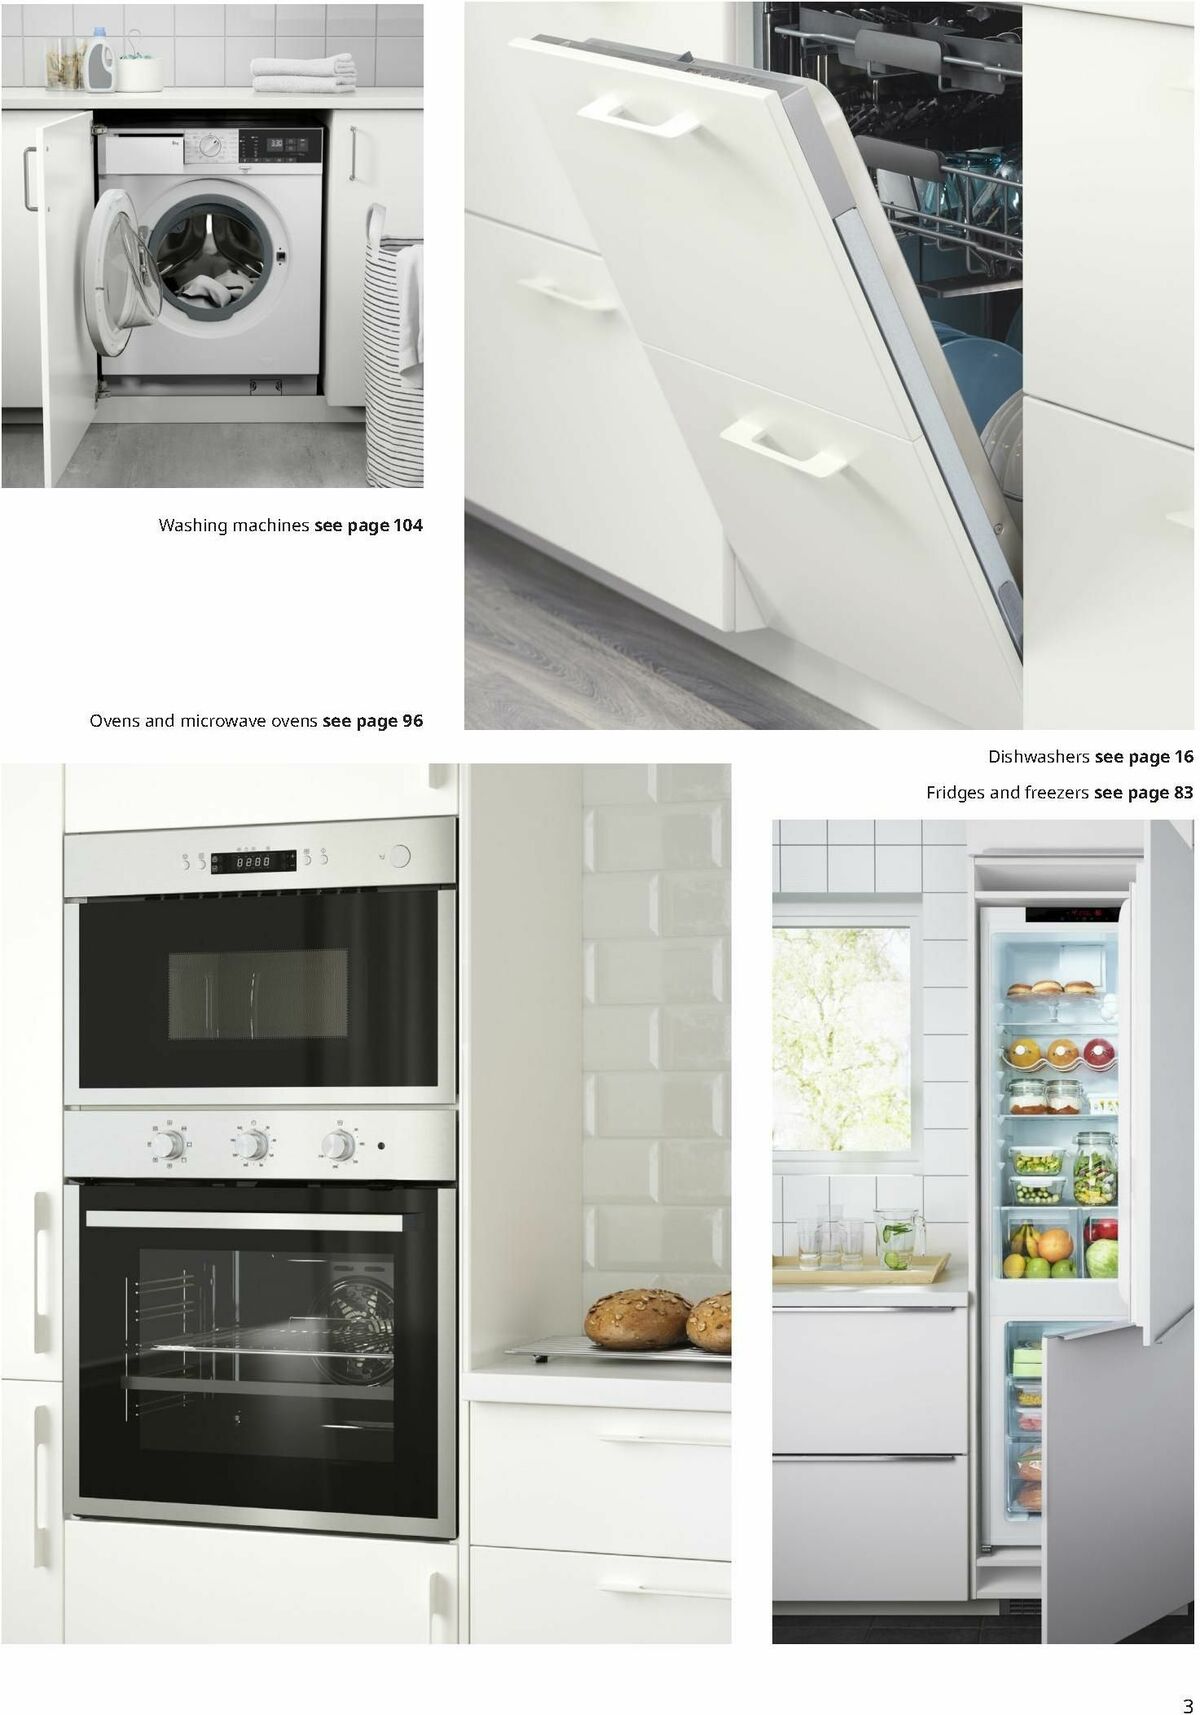 IKEA Appliances Offers from 24 January